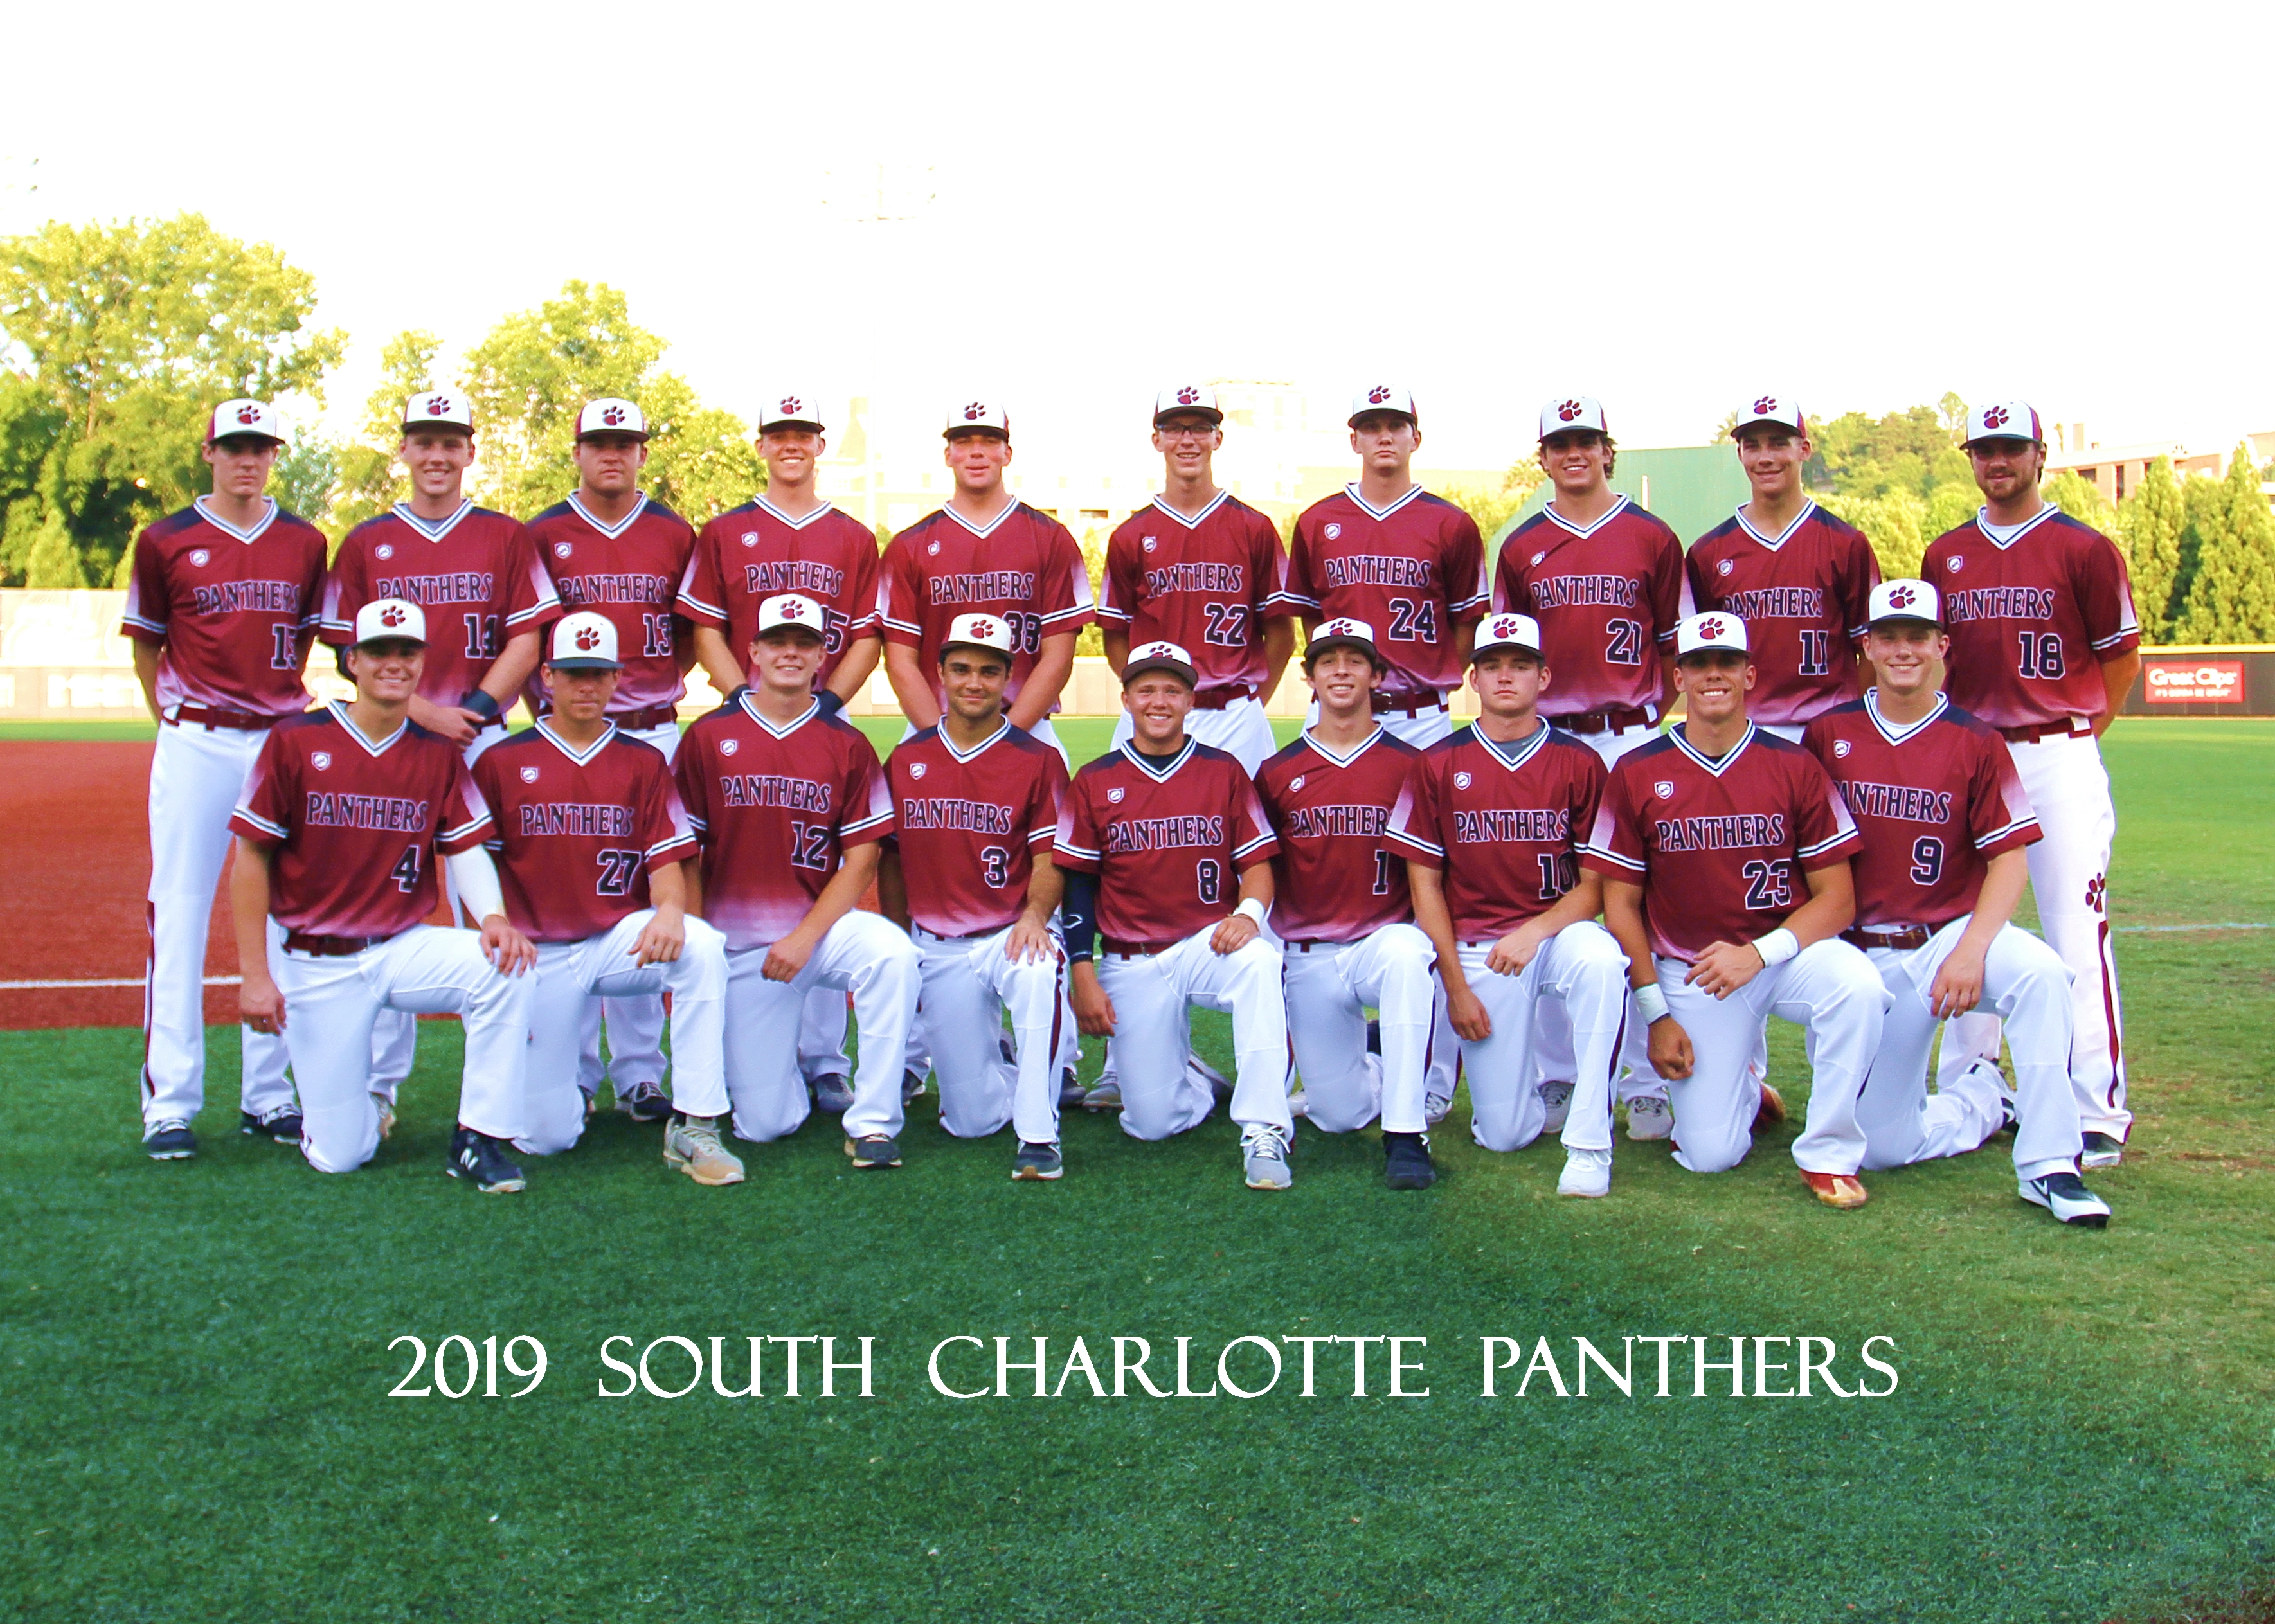 South Charlotte Panthers Baseball Club, Owner, and GM Scott Clemons Interview featured image